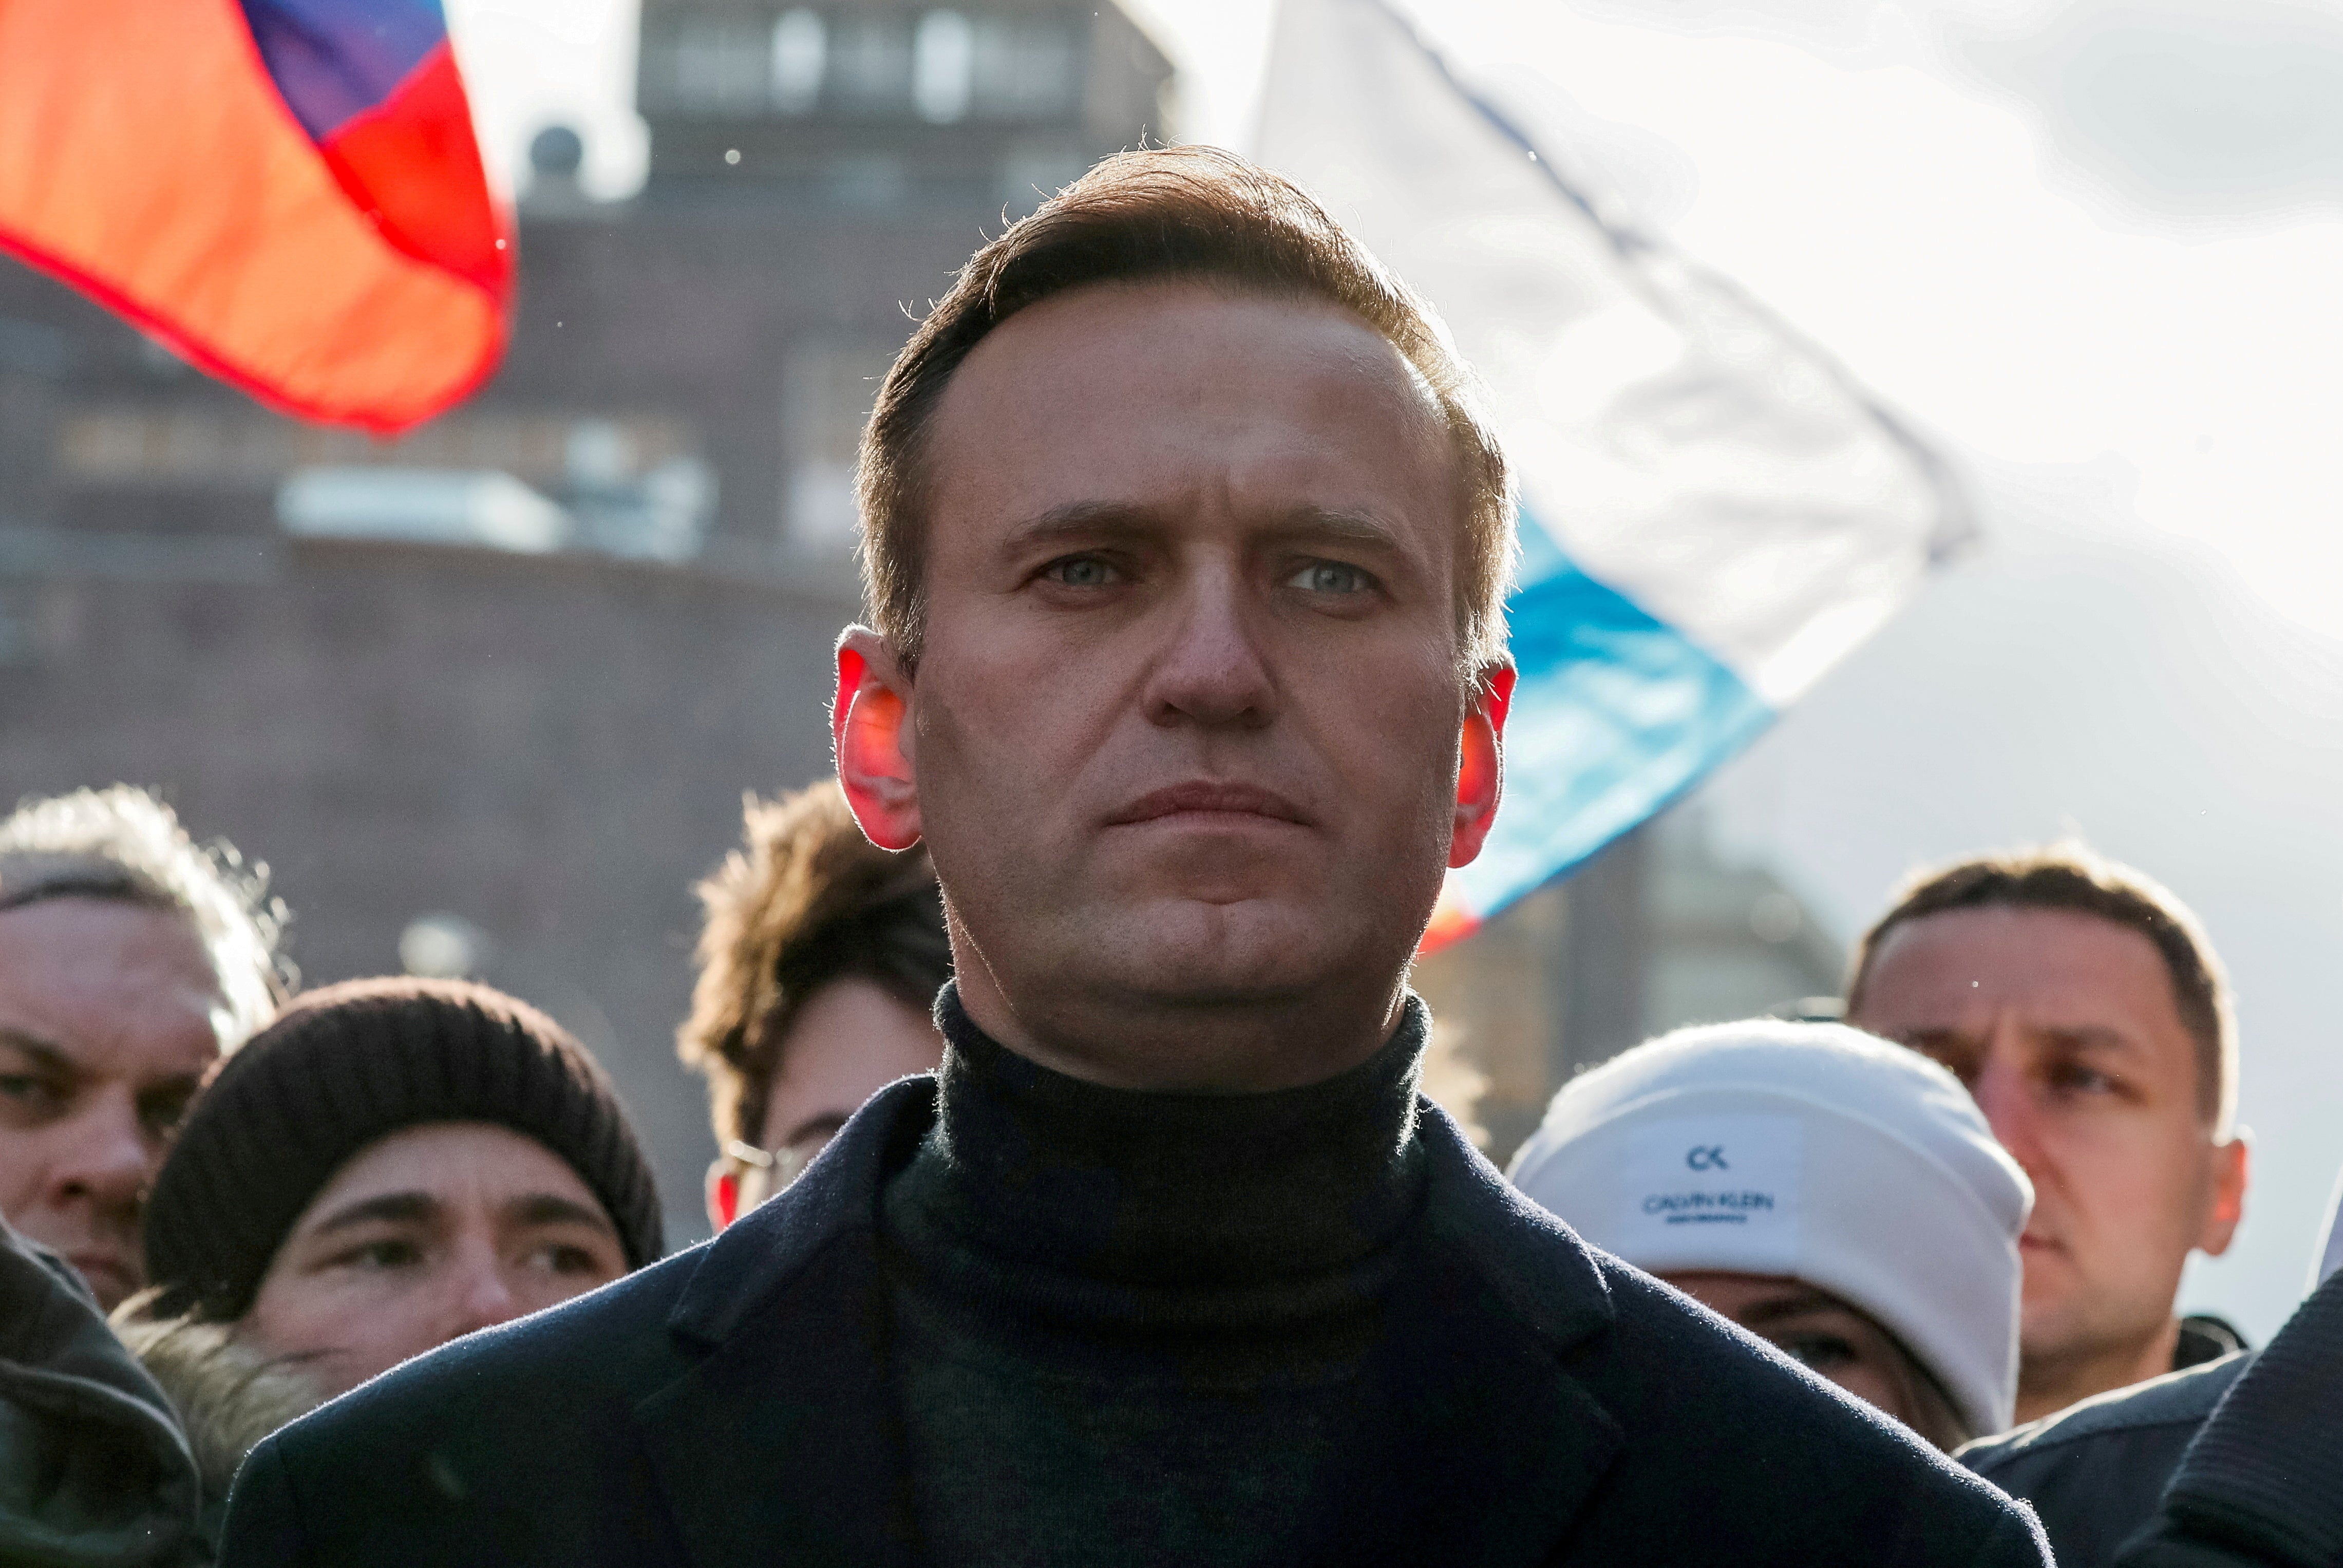 Russian opposition politician Alexei Navalny who fell ill on a flight last year found to have been novichok poisoning